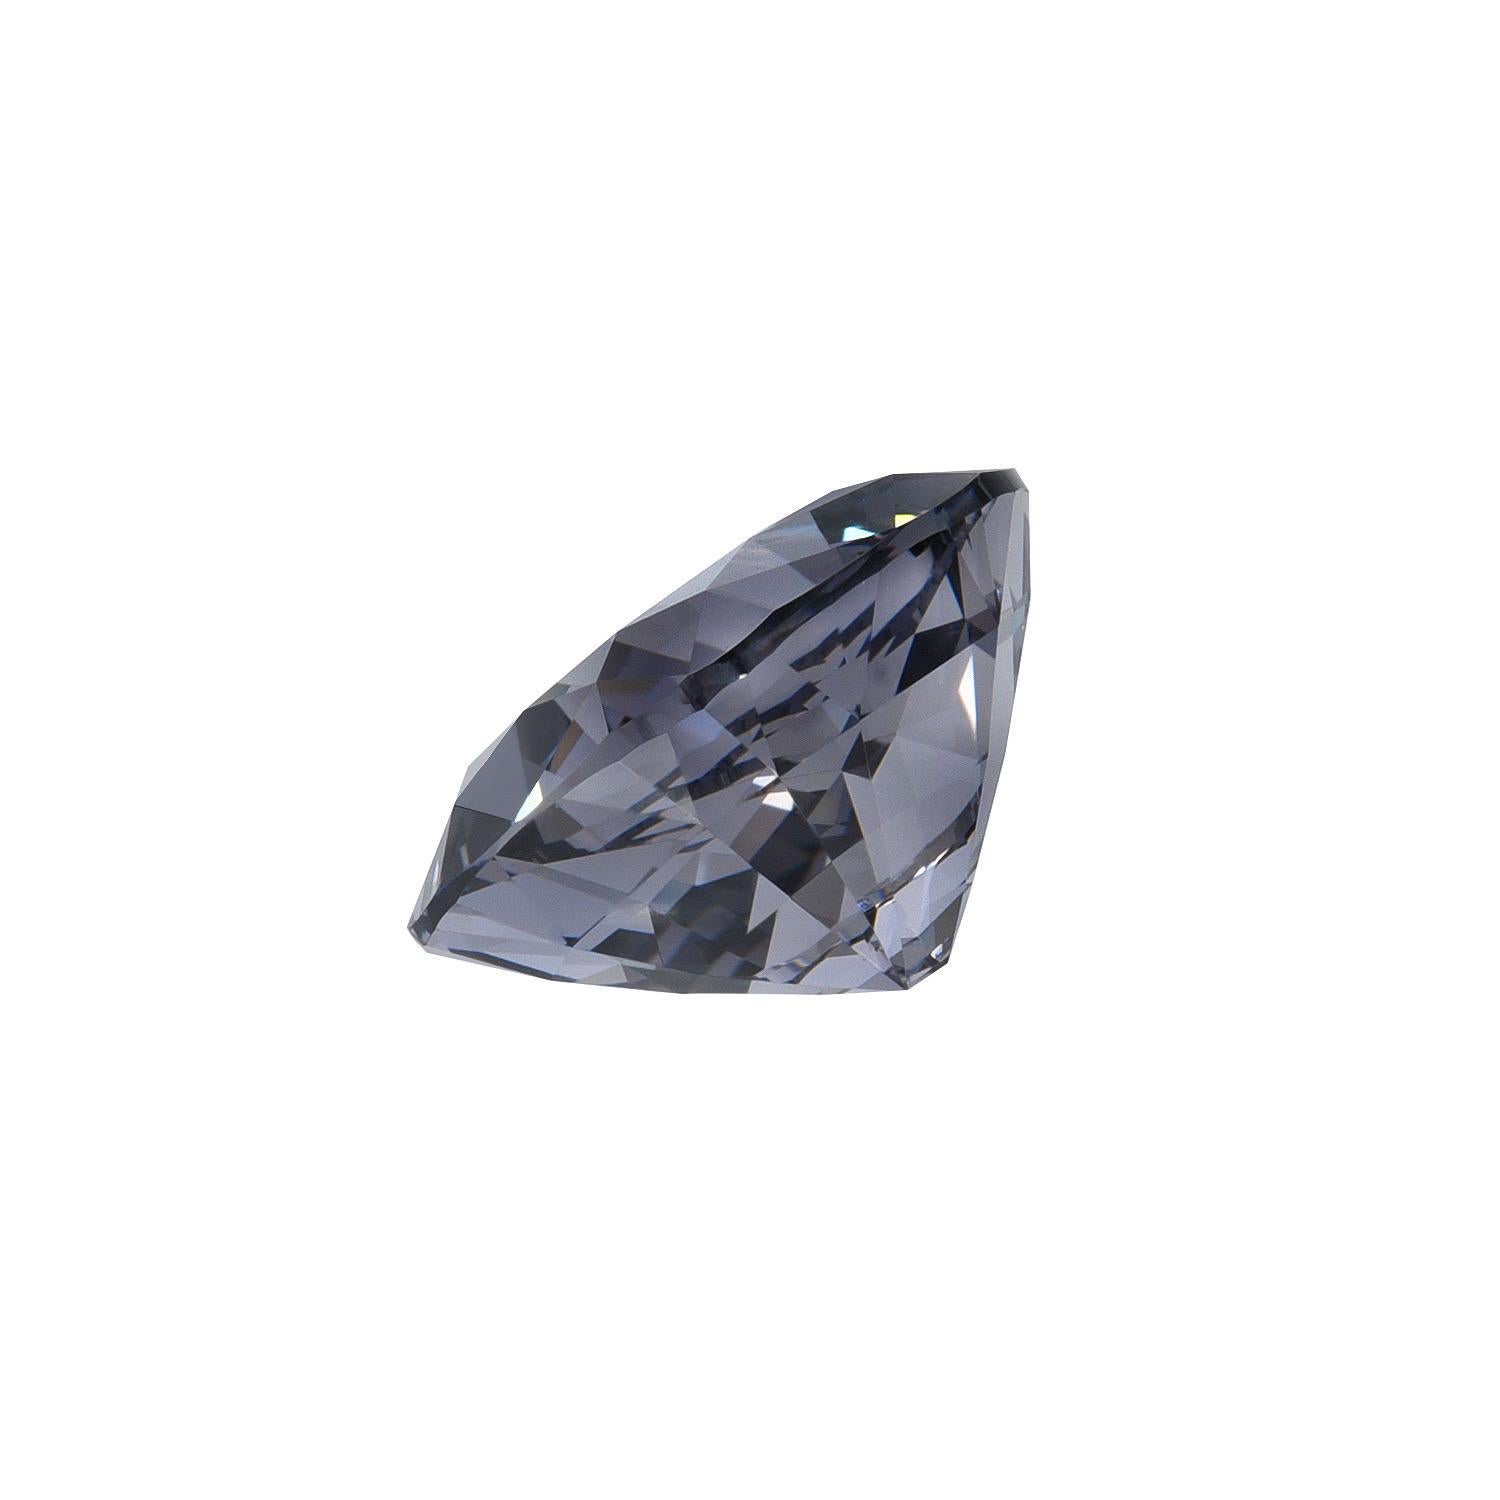 Spectacular unisex 4.08 carat, Gray Spinel unmounted gem, offered loose to a fine gemstone collector.
Dimensions: 10.17 x 8.67 x 6.07 mm.
Returns are accepted and paid by us within 7 days of delivery.
We offer supreme custom jewelry work upon